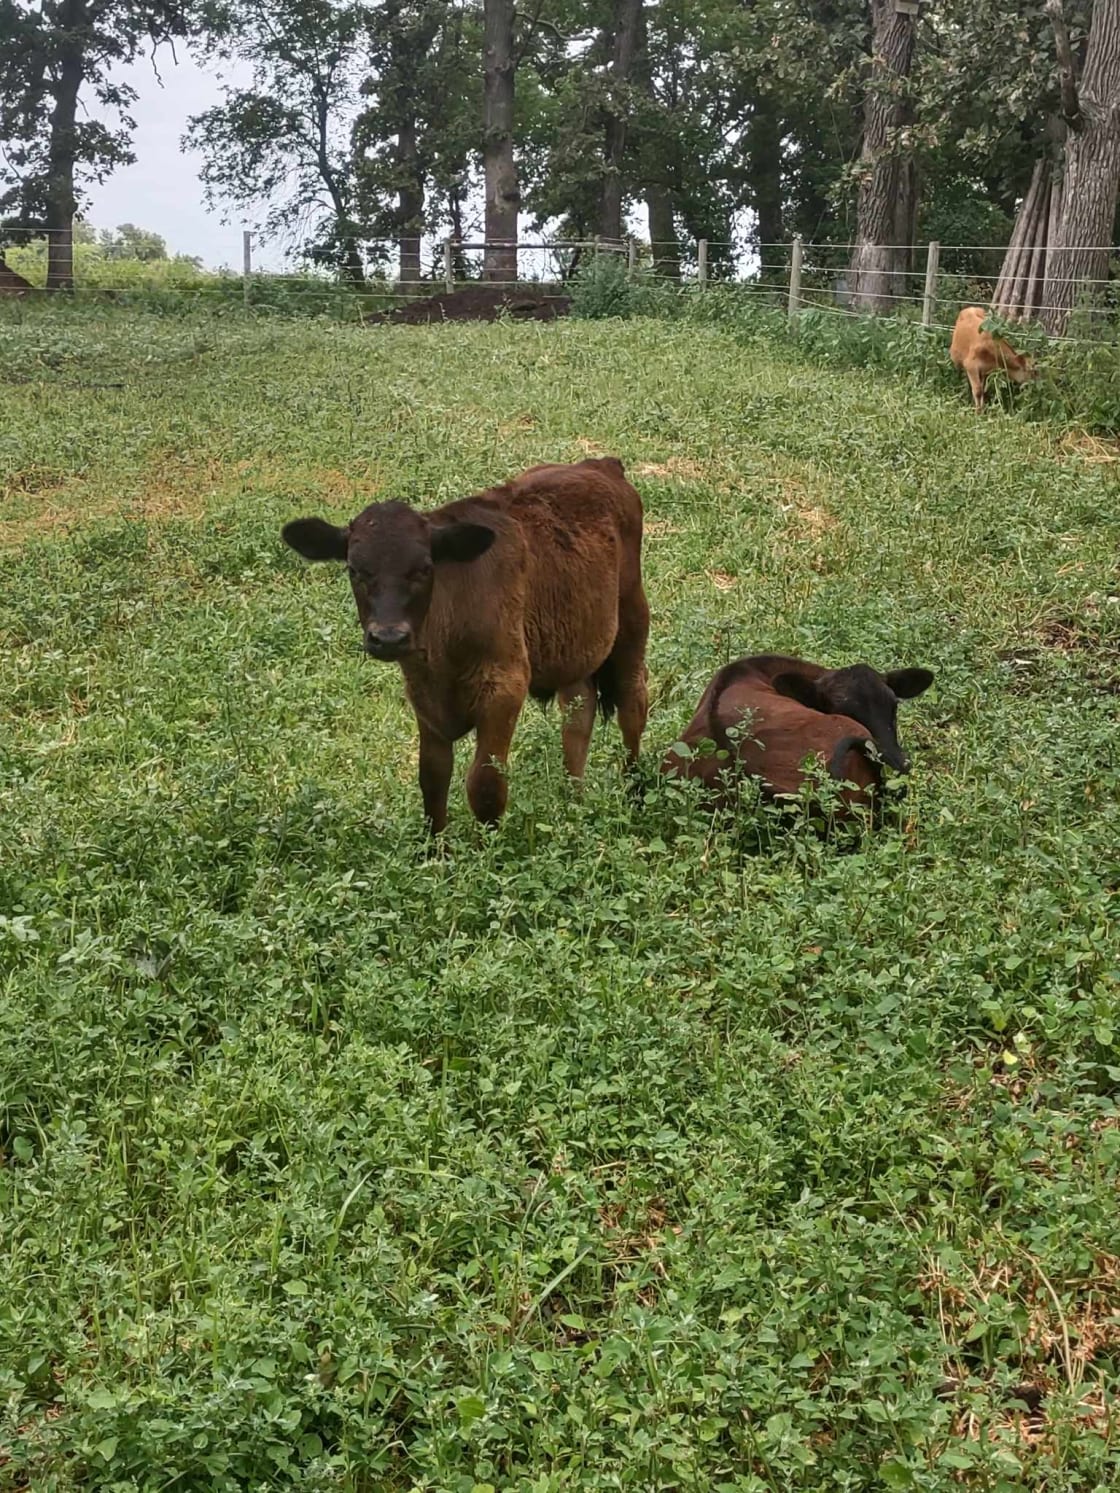 Adorable little cows on the property!